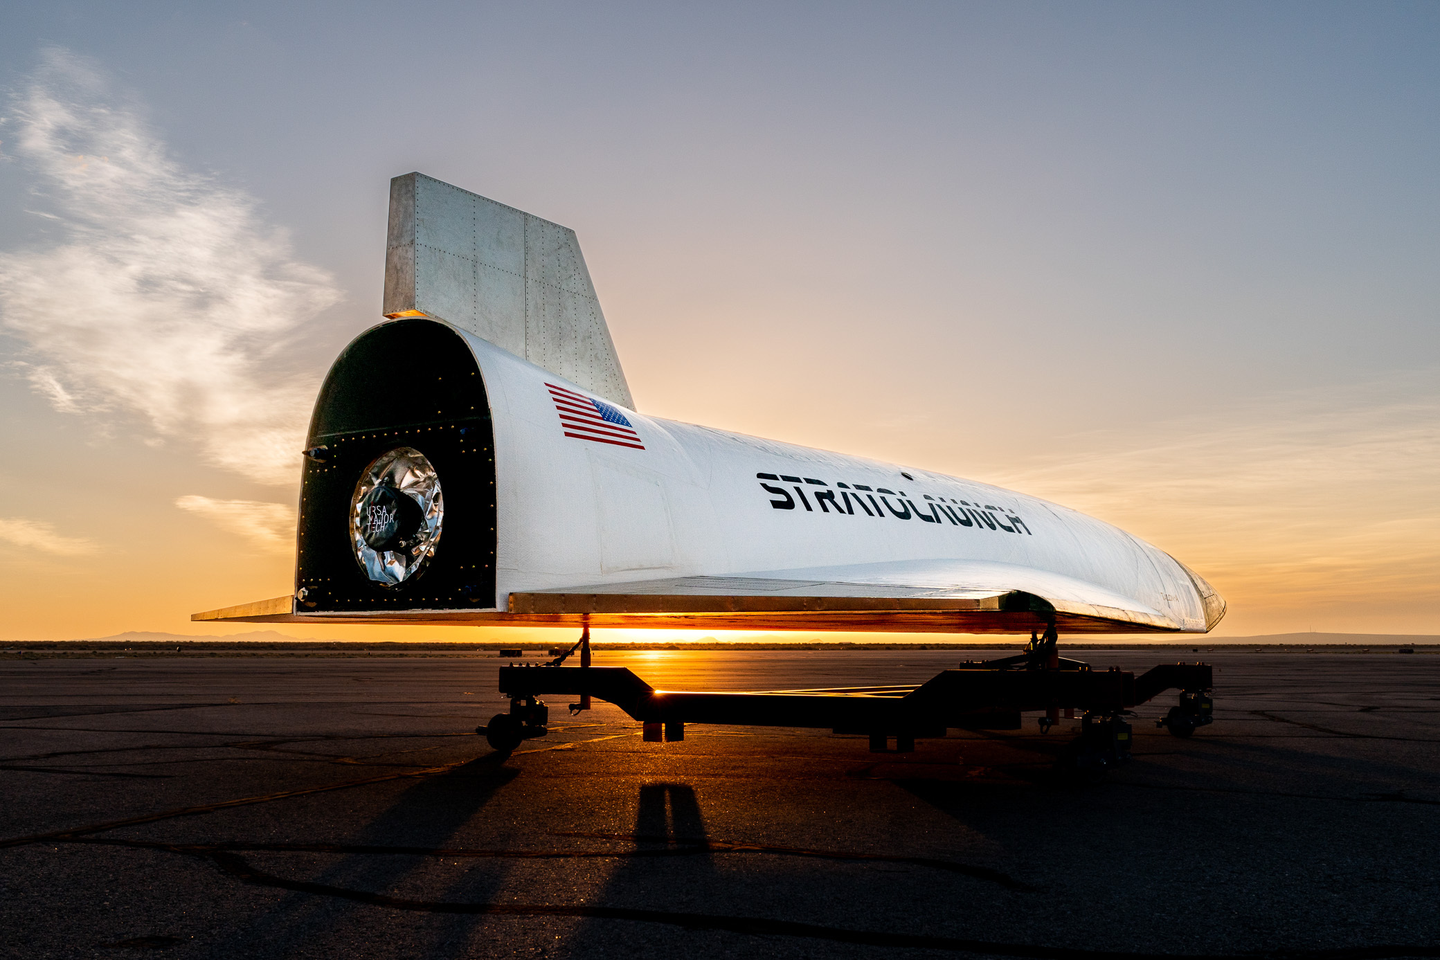 Stratolaunch's Talon-A hypersonic testbed vehicle that will be carried by the Roc. <em>Credit: Stratolaunch</em>